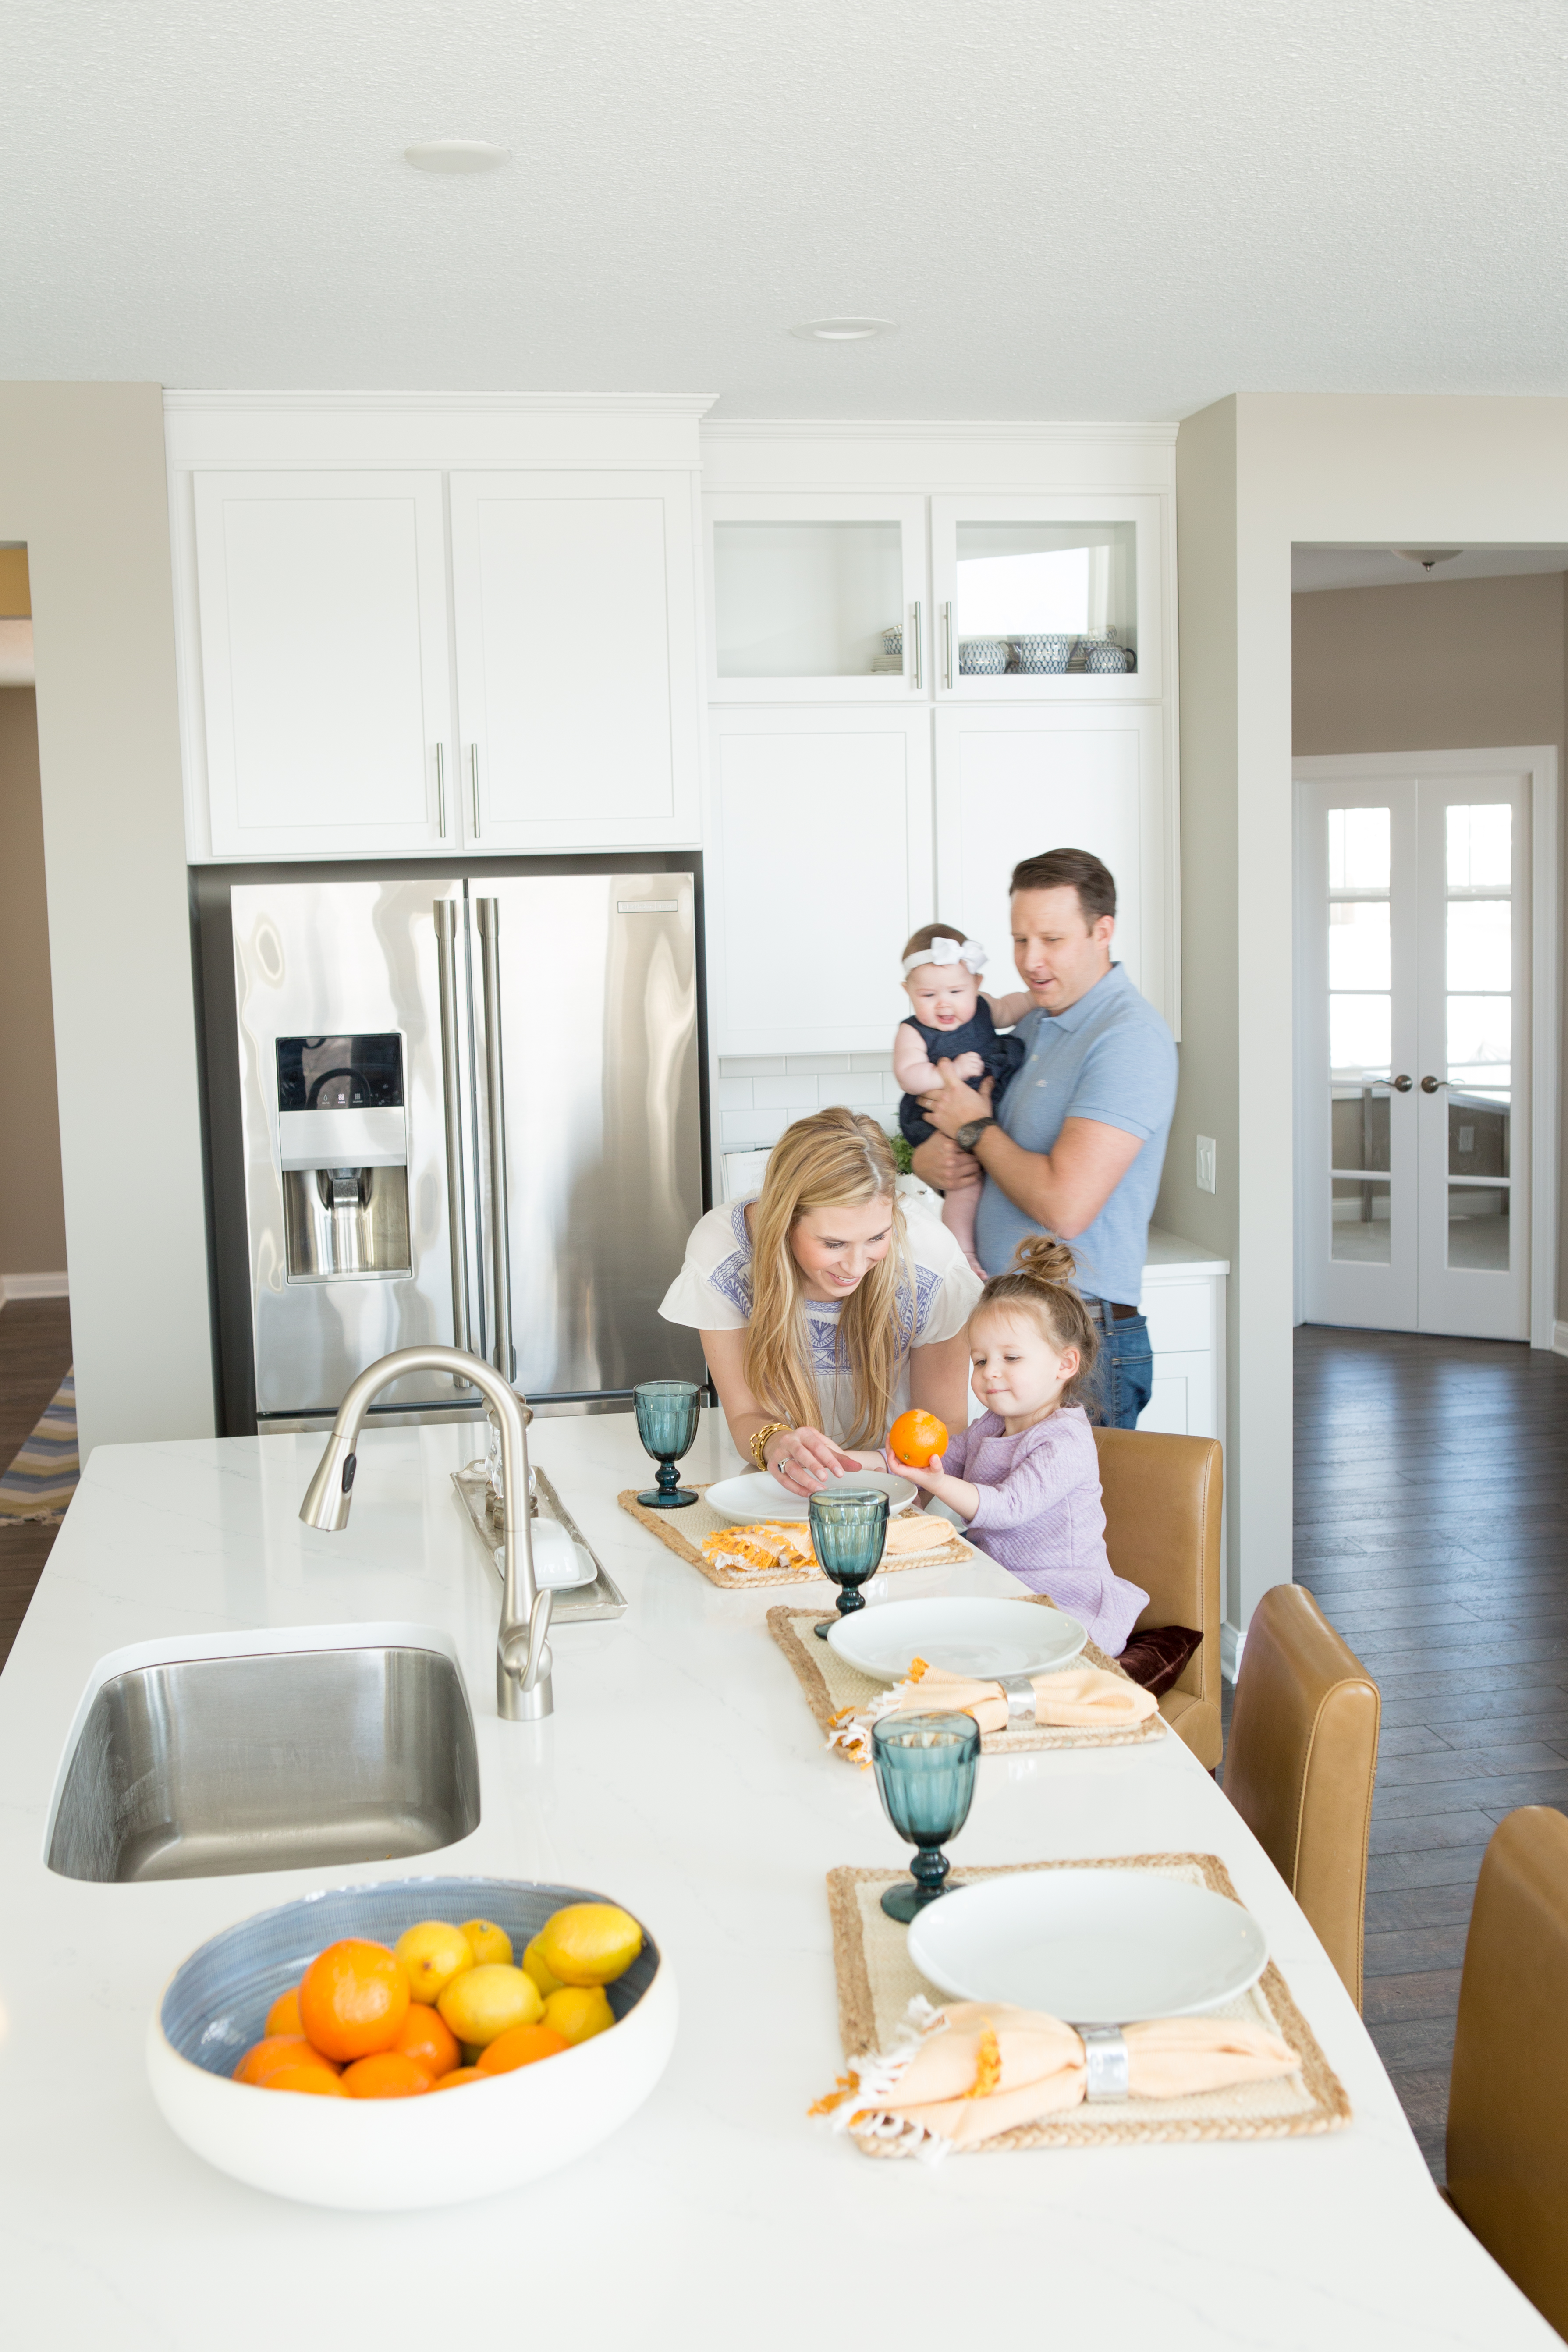 Image for Spring 2015 Parade of Homes Shares Homebuilding Experiences from Real Families